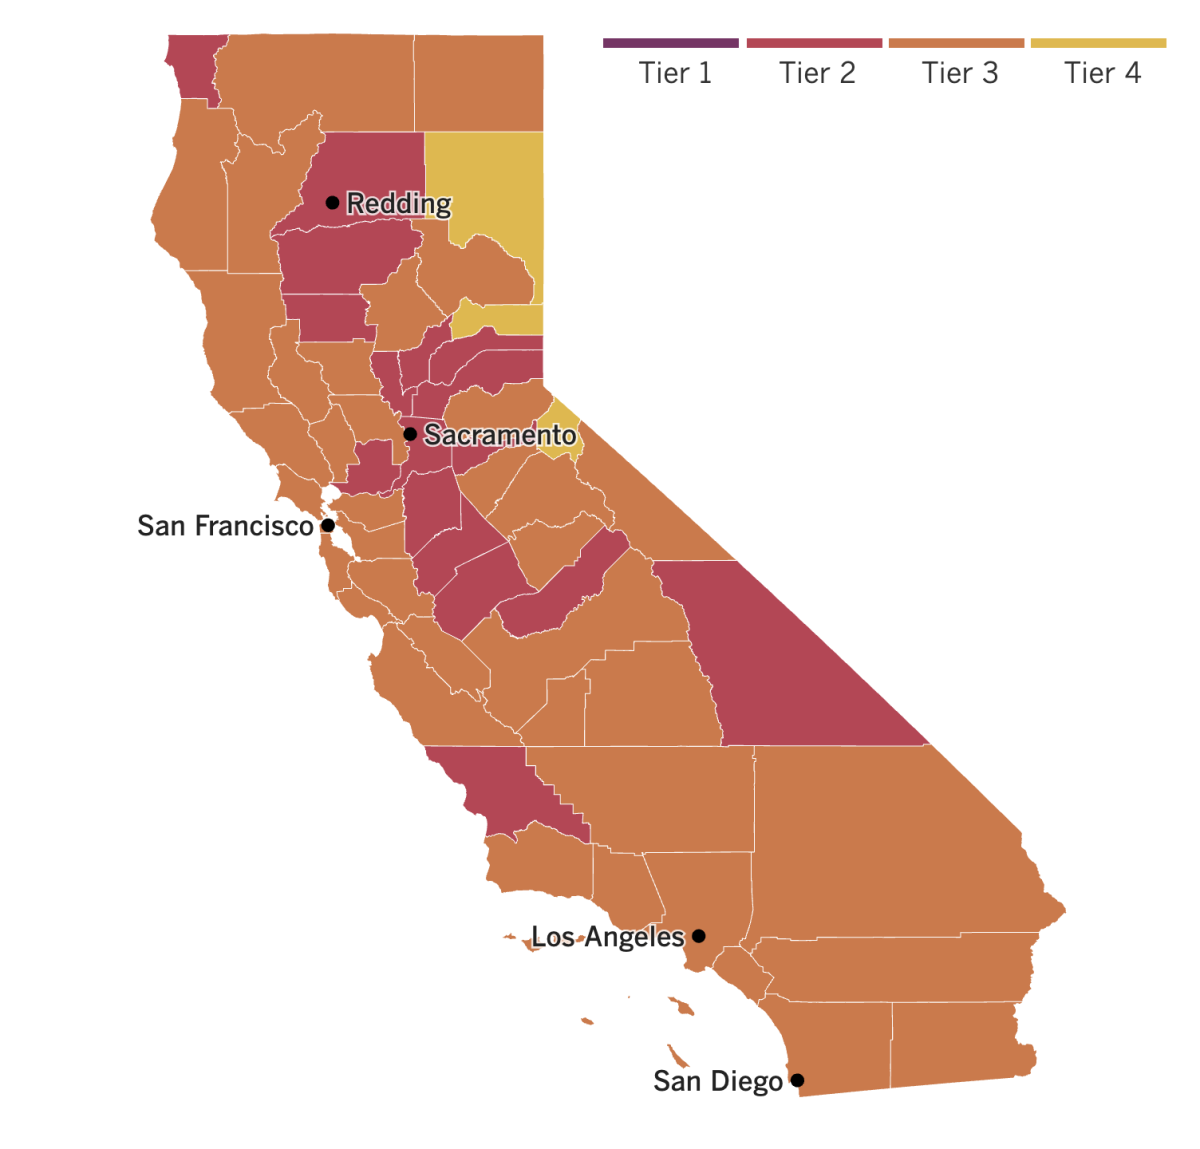 California reopening map showing 3 counties in the yellow tier, 38 orange and 17 red. Five have moved from red to orange.